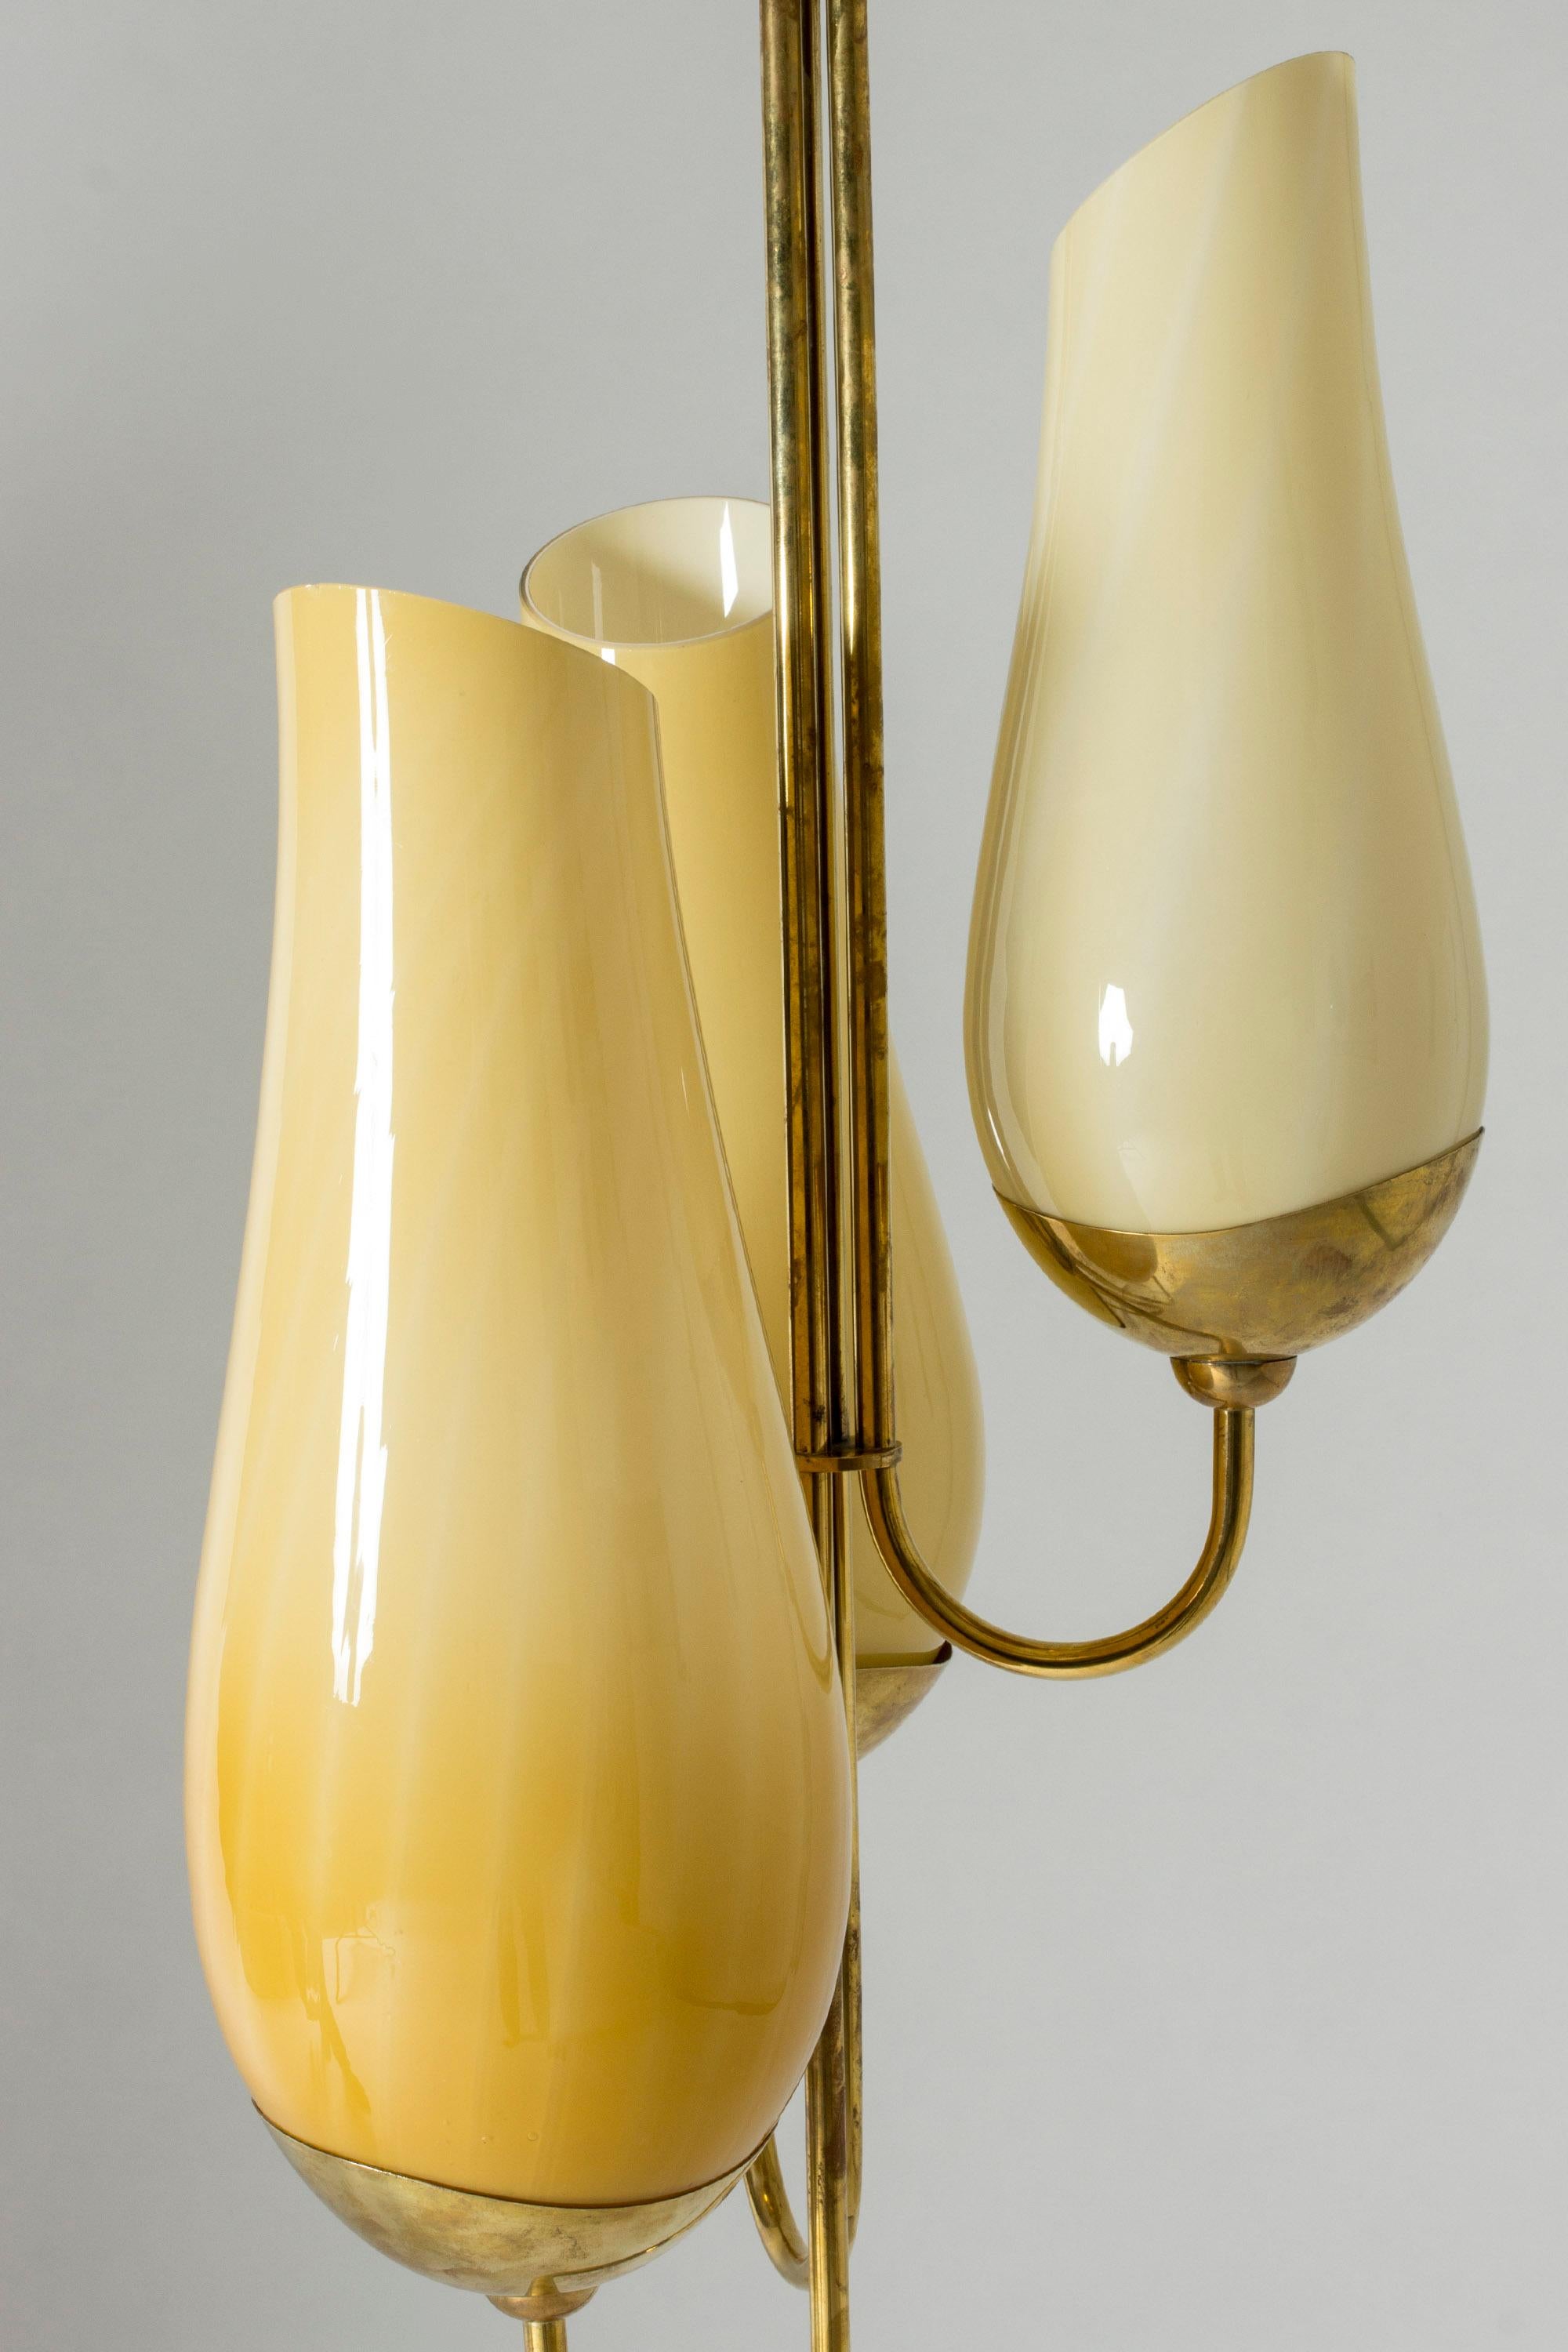 Mid-20th Century Brass and Glass Cgandelier by Paavo Tynell and Gunnel Nyman for Taito Oy, 1940s For Sale